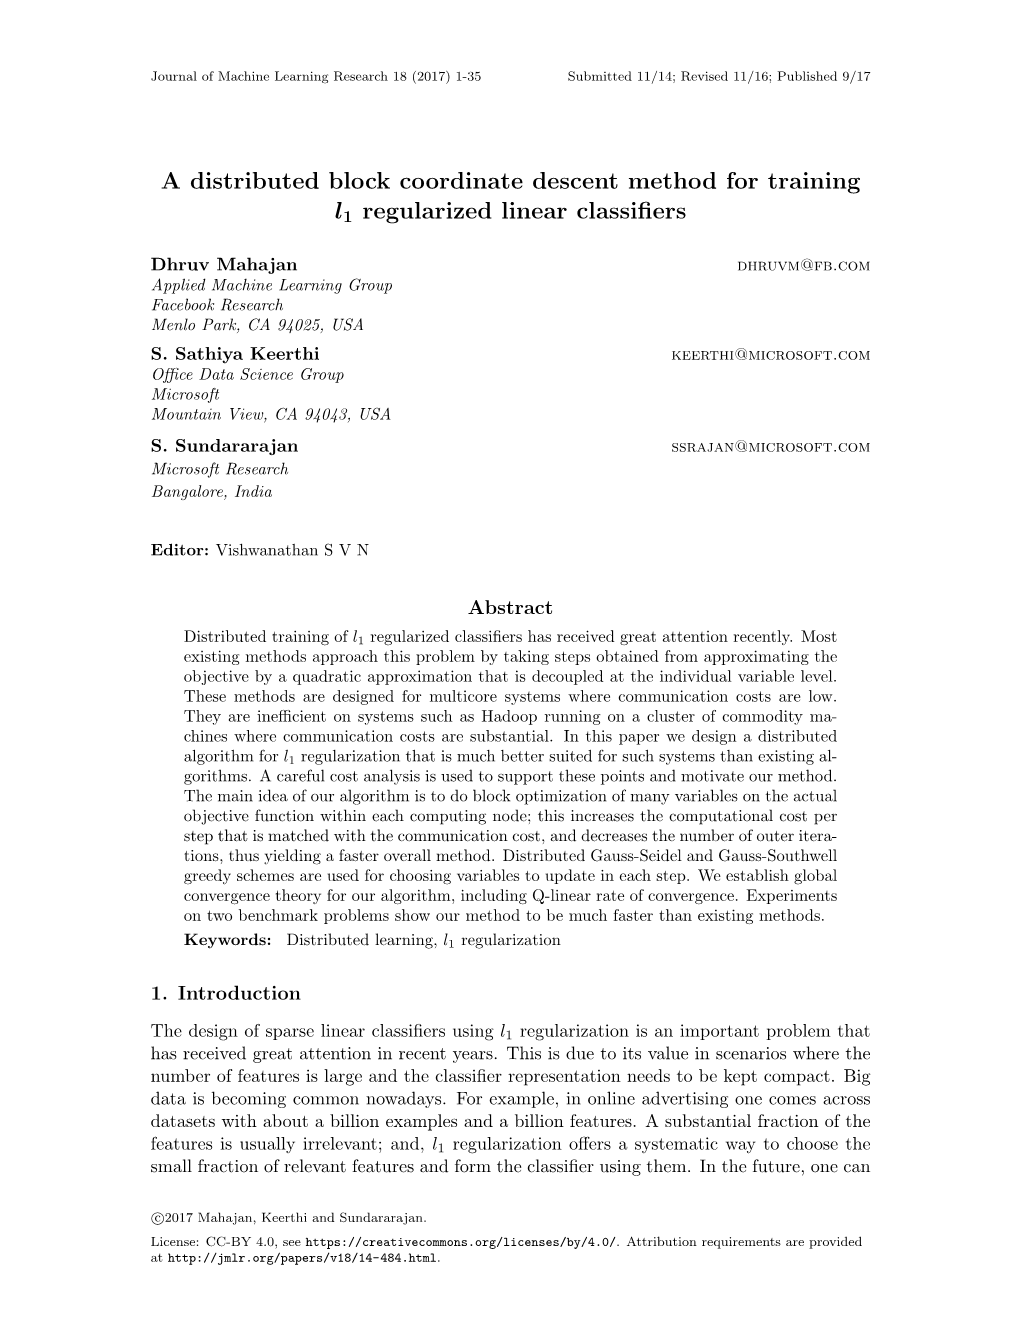 A Distributed Block Coordinate Descent Method for Training L1 Regularized Linear Classiﬁers